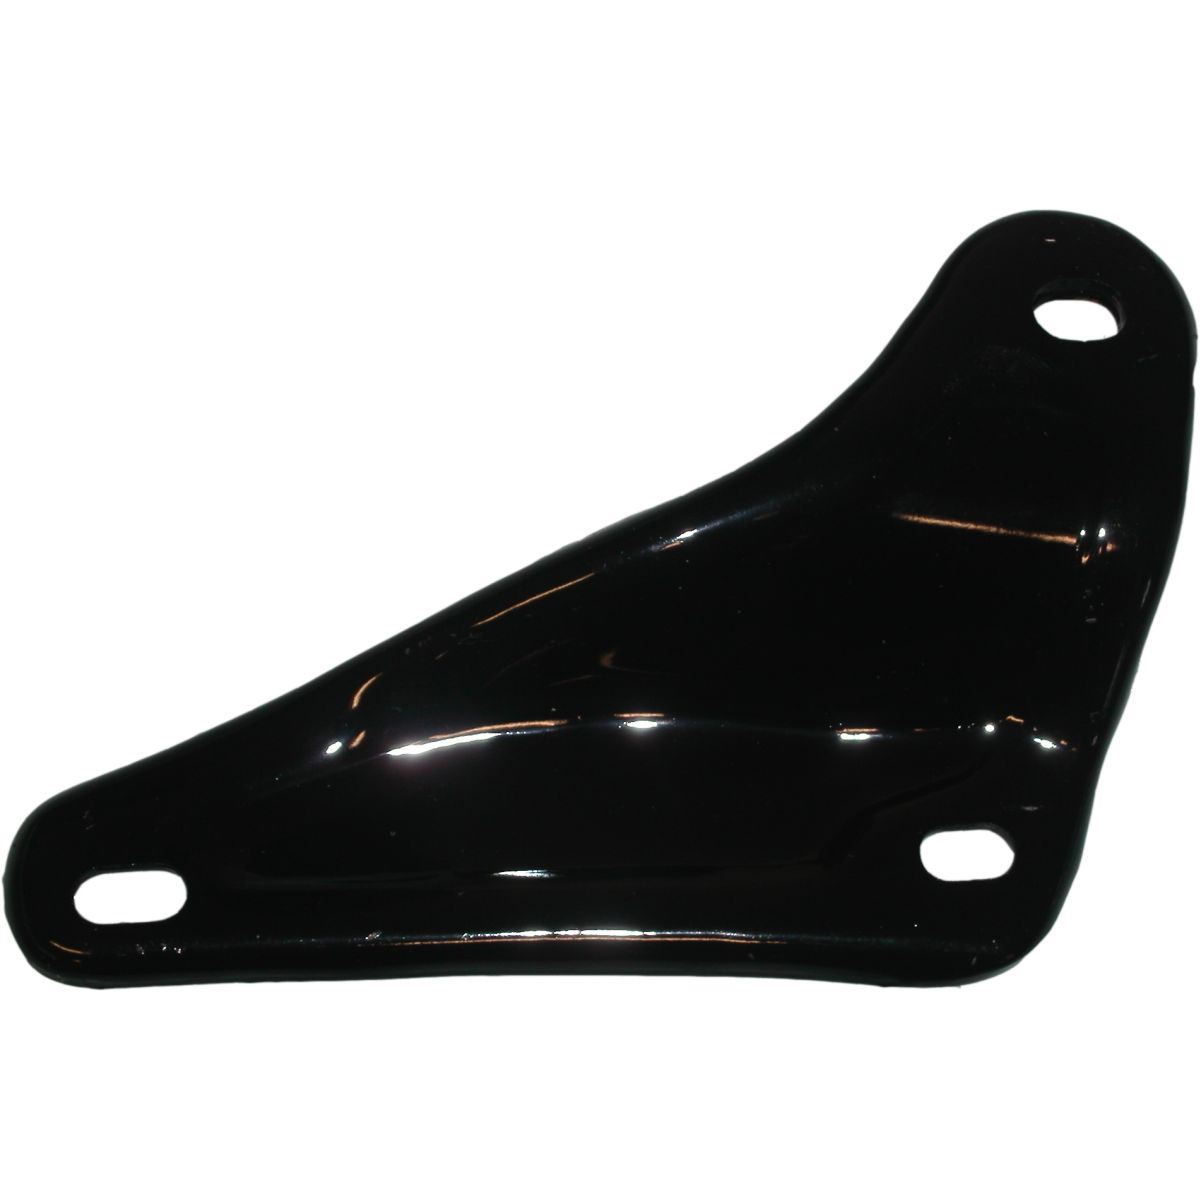 AW Motorcycle Parts. Exhaust Bracket for 555009 Cub Exhaust